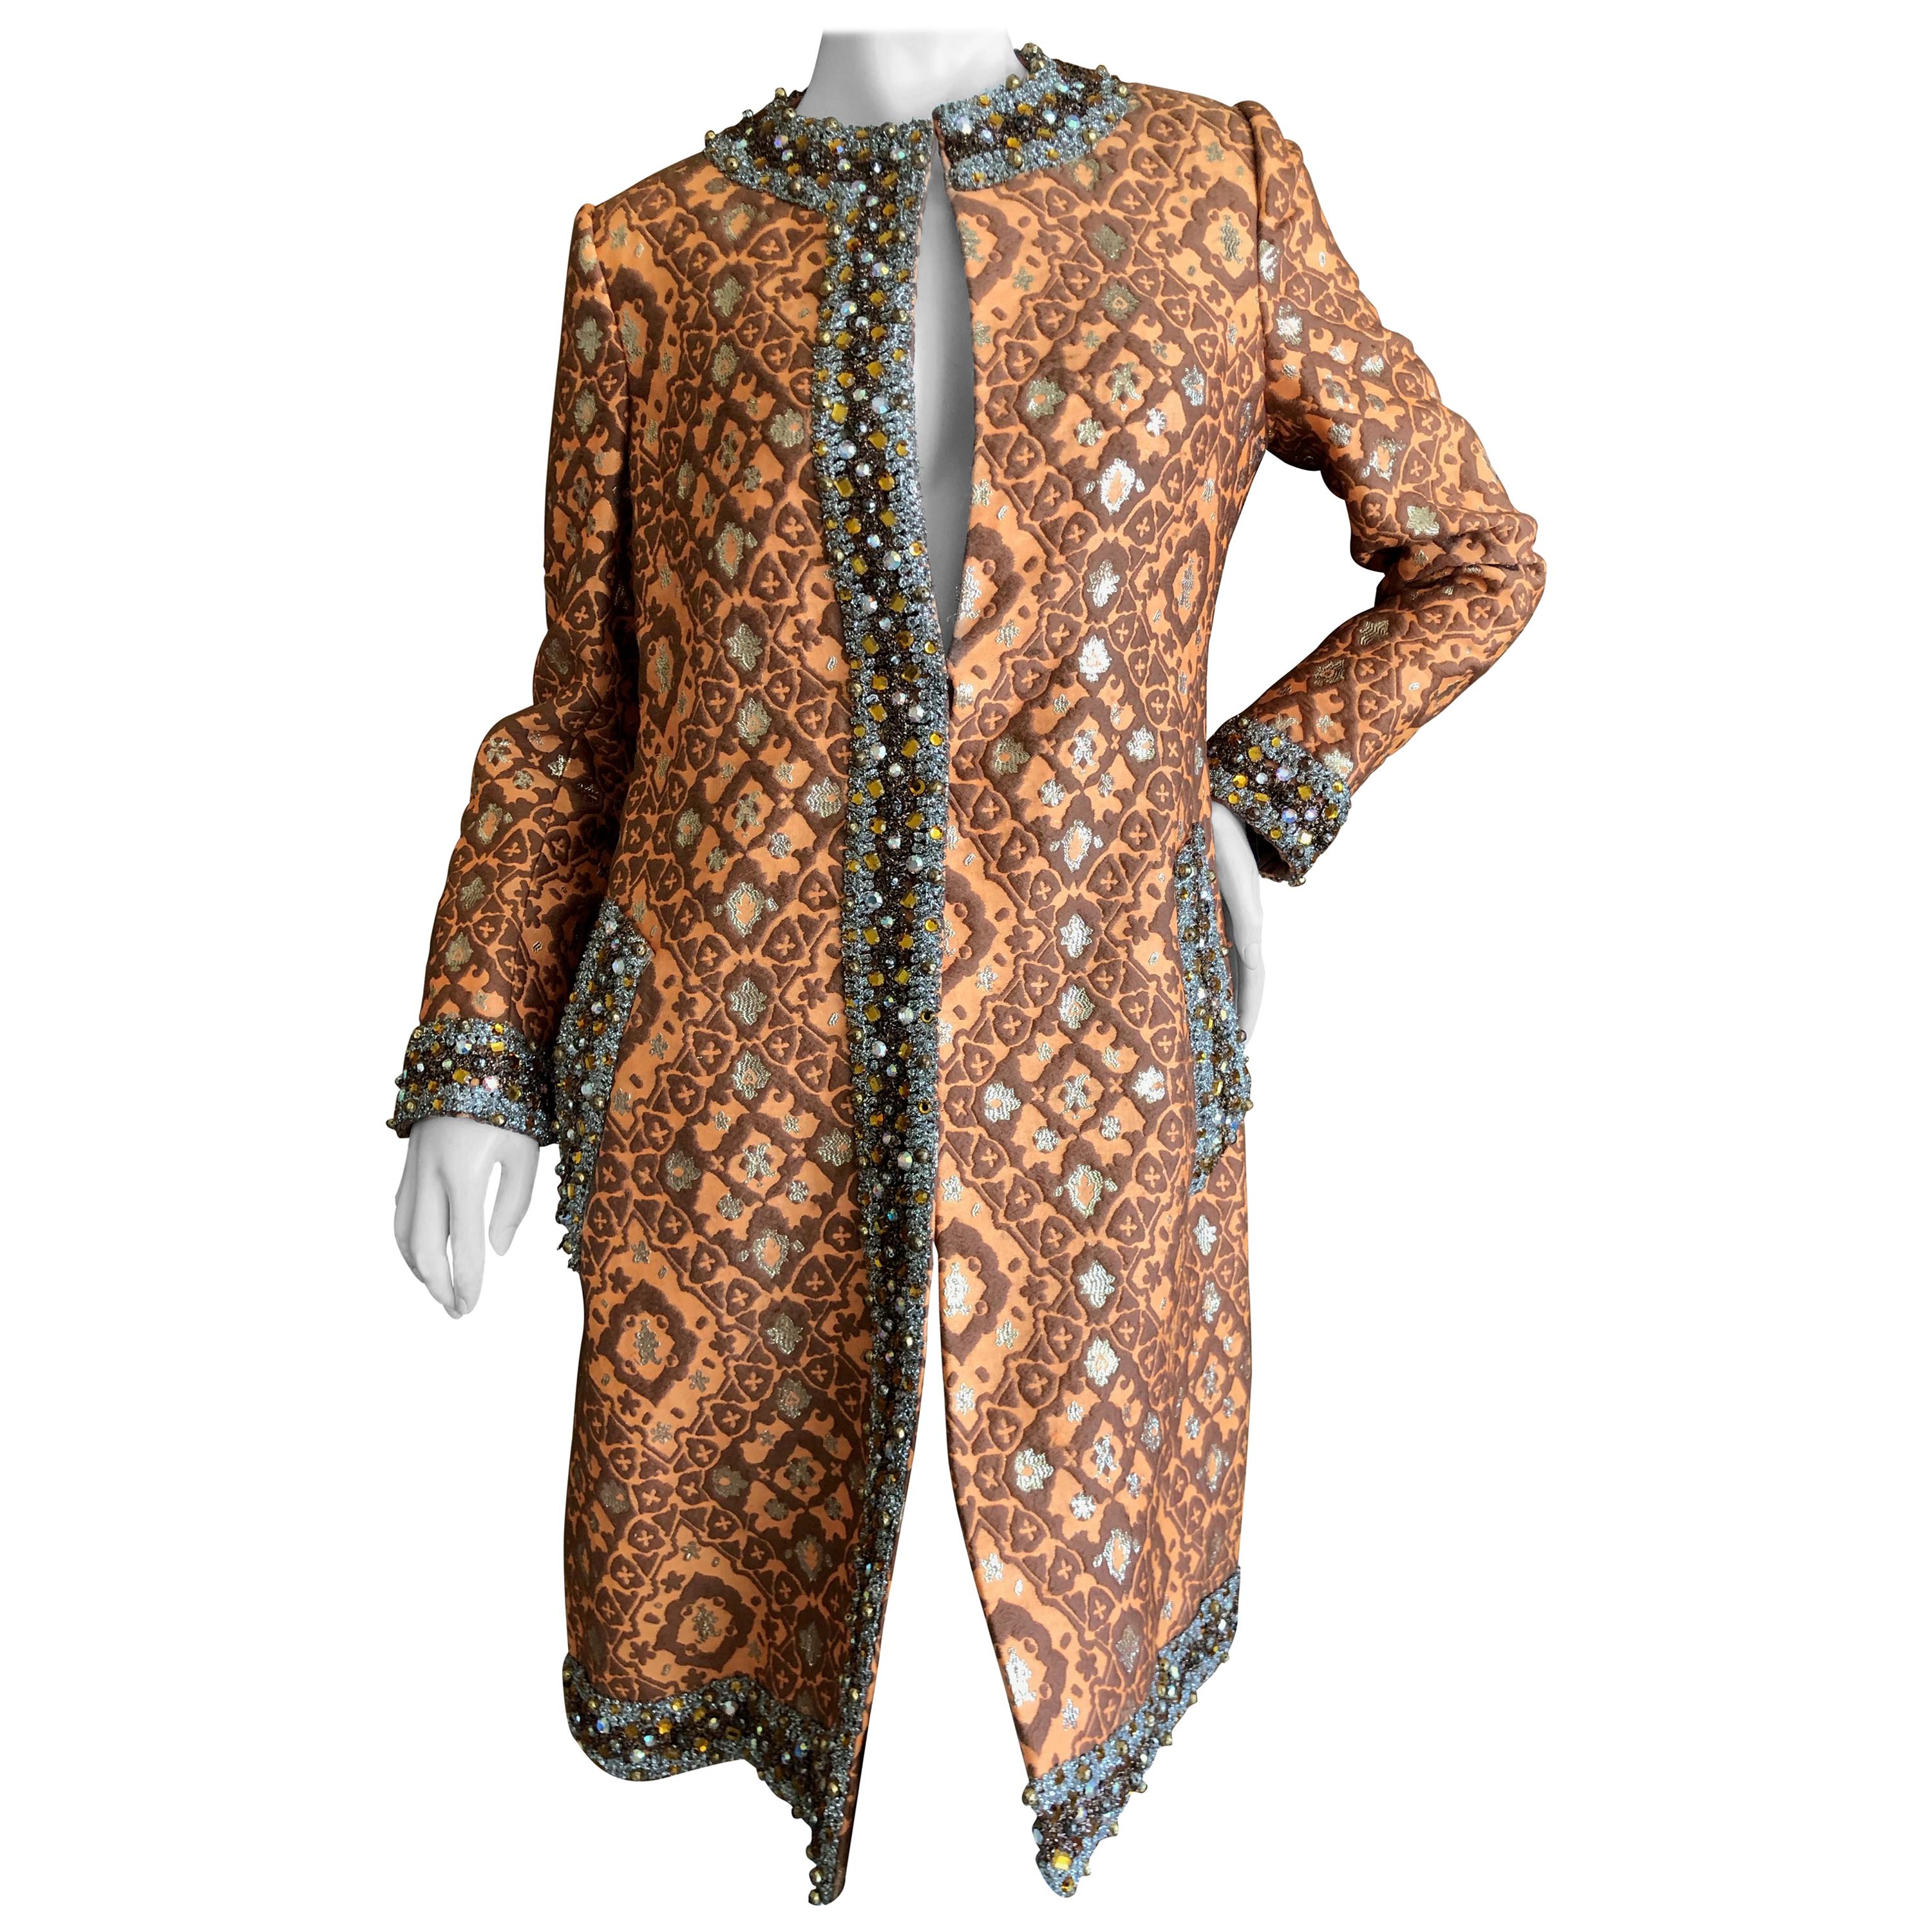 Geoffrey Beene Rare Documented Mod 1966 Heavily Embellished Shiny Brocade Dress For Sale